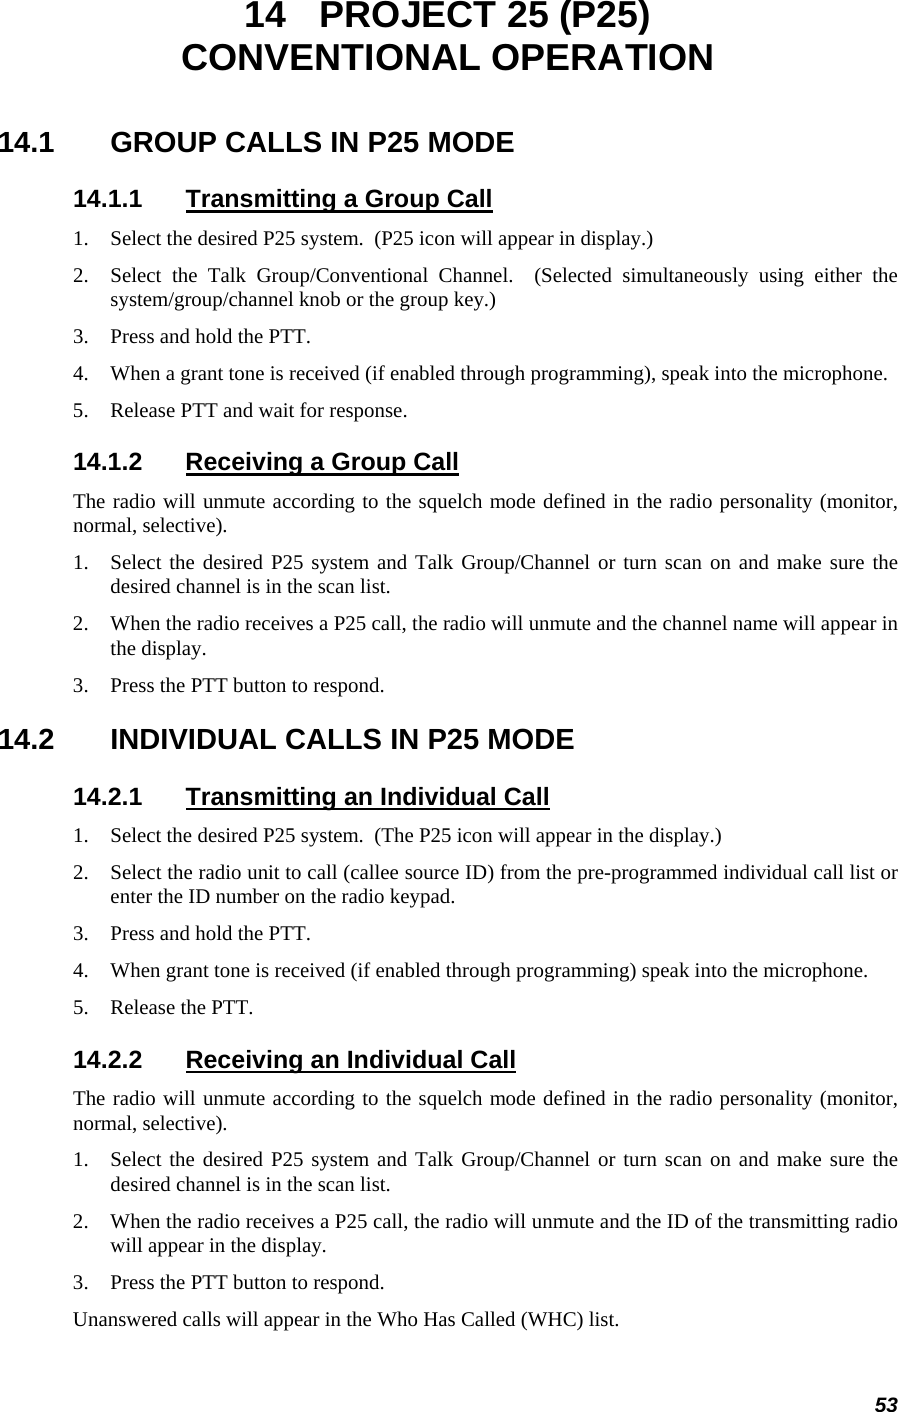 53 14  PROJECT 25 (P25) CONVENTIONAL OPERATION 14.1  GROUP CALLS IN P25 MODE 14.1.1  Transmitting a Group Call 1. Select the desired P25 system.  (P25 icon will appear in display.) 2. Select the Talk Group/Conventional Channel.  (Selected simultaneously using either the system/group/channel knob or the group key.) 3. Press and hold the PTT. 4. When a grant tone is received (if enabled through programming), speak into the microphone. 5. Release PTT and wait for response. 14.1.2  Receiving a Group Call The radio will unmute according to the squelch mode defined in the radio personality (monitor, normal, selective). 1. Select the desired P25 system and Talk Group/Channel or turn scan on and make sure the desired channel is in the scan list. 2. When the radio receives a P25 call, the radio will unmute and the channel name will appear in the display. 3. Press the PTT button to respond. 14.2  INDIVIDUAL CALLS IN P25 MODE 14.2.1  Transmitting an Individual Call 1. Select the desired P25 system.  (The P25 icon will appear in the display.) 2. Select the radio unit to call (callee source ID) from the pre-programmed individual call list or enter the ID number on the radio keypad. 3. Press and hold the PTT. 4. When grant tone is received (if enabled through programming) speak into the microphone. 5. Release the PTT. 14.2.2  Receiving an Individual Call The radio will unmute according to the squelch mode defined in the radio personality (monitor, normal, selective). 1. Select the desired P25 system and Talk Group/Channel or turn scan on and make sure the desired channel is in the scan list. 2. When the radio receives a P25 call, the radio will unmute and the ID of the transmitting radio will appear in the display. 3. Press the PTT button to respond. Unanswered calls will appear in the Who Has Called (WHC) list. 